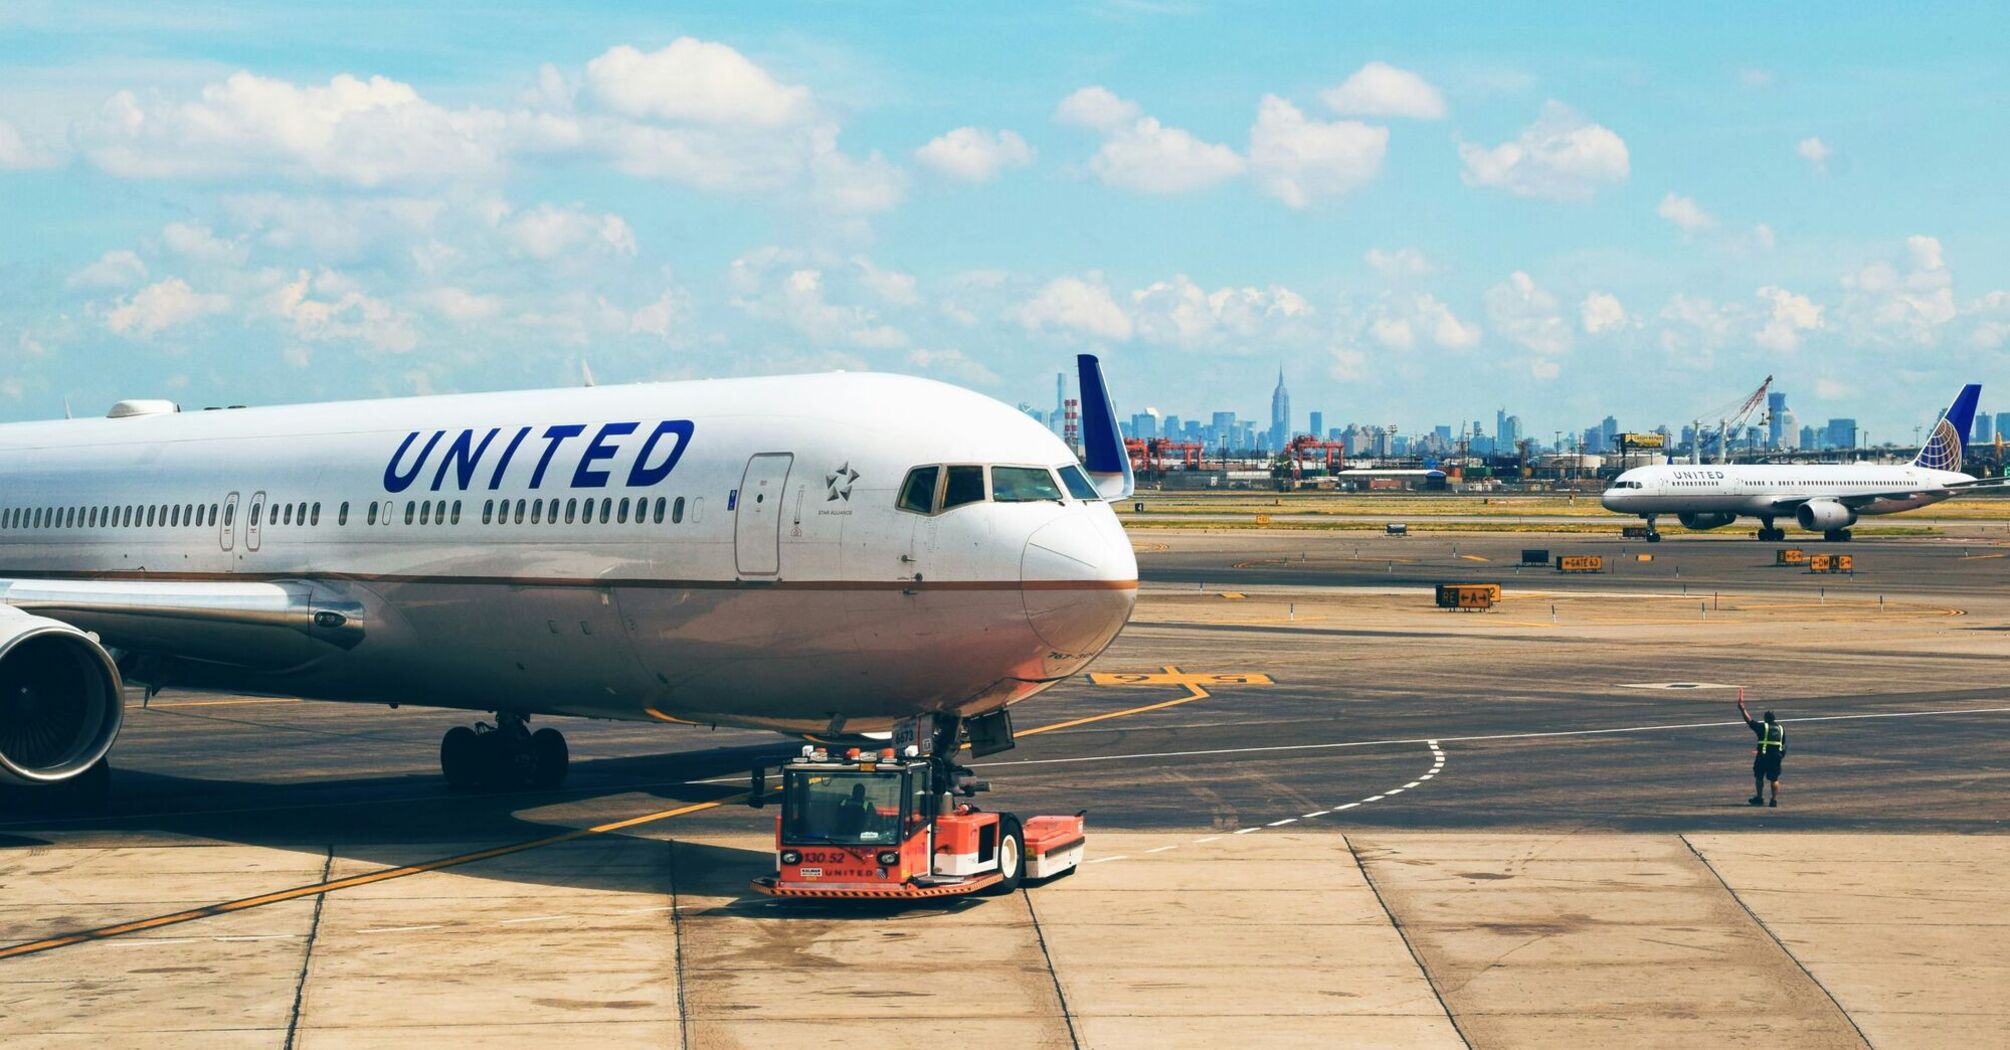 United Airlines plane on the runaway